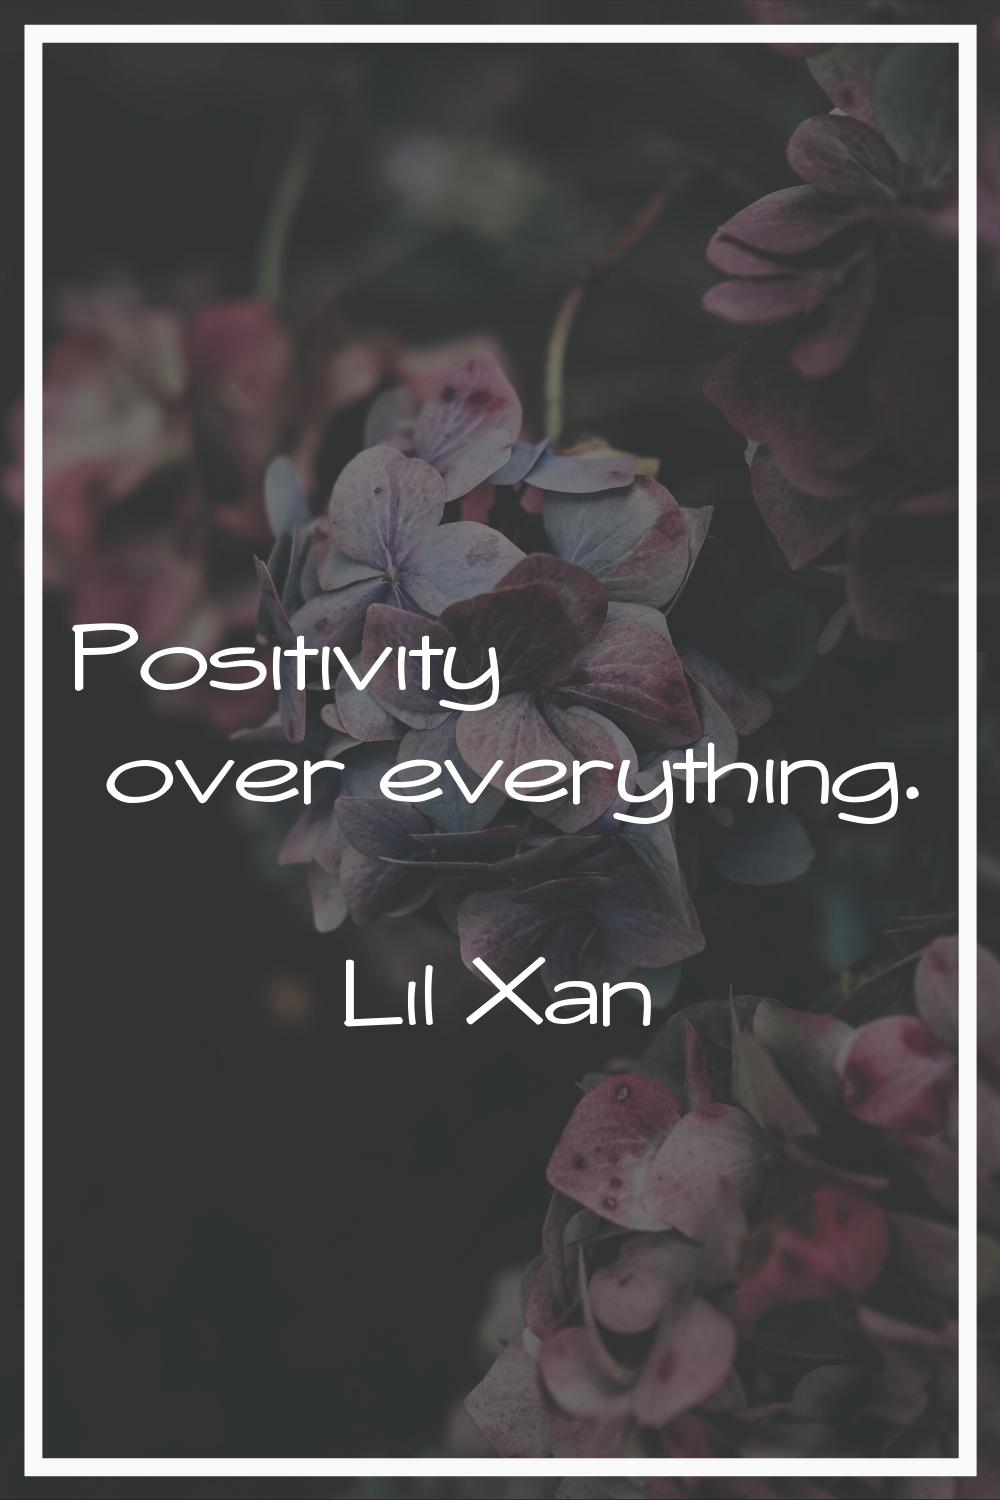 Positivity over everything.